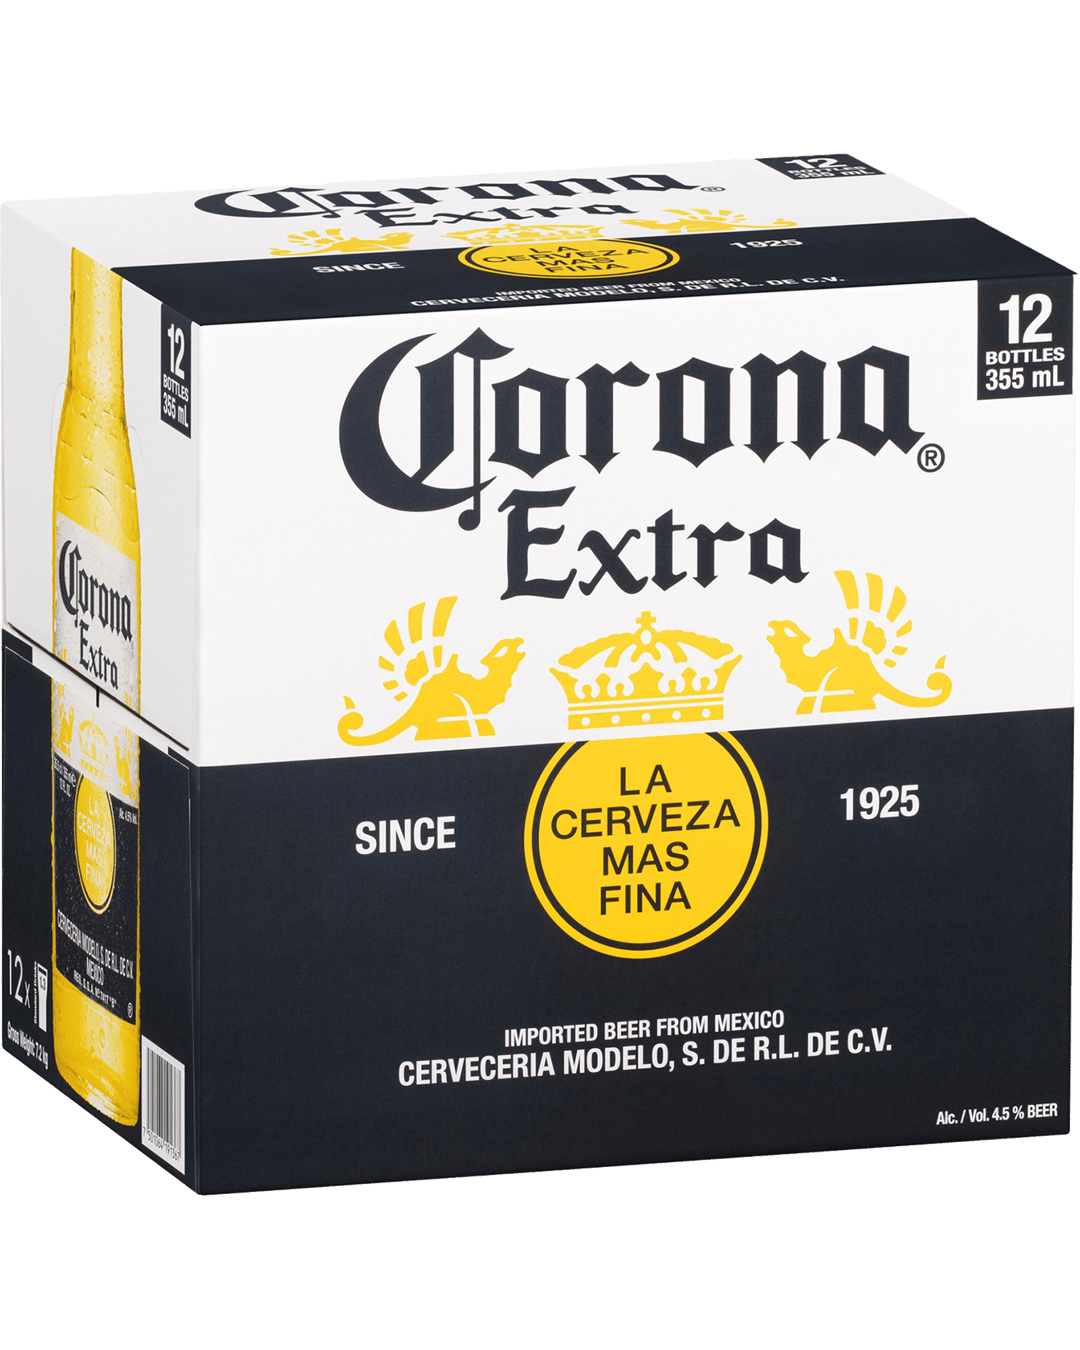 Buy Corona Extra Beer Cans 355ml online with (same-day FREE delivery ...